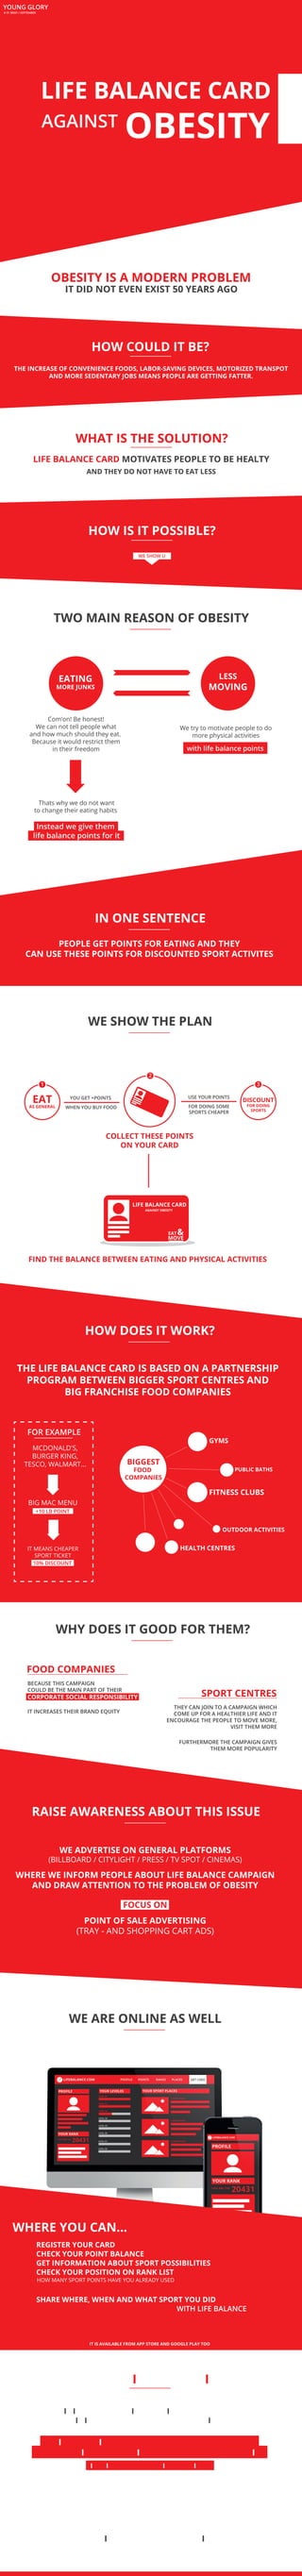 LIFE BALANCE CARD 
OBESITY 
HOW COULD IT BE? 
THE INCREASE OF CONVENIENCE FOODS, LABOR-SAVING DEVICES, MOTORIZED TRANSPOT 
AND MORE SEDENTARY JOBS MEANS PEOPLE ARE GETTING FATTER. 
2 
BIGGEST 
FOOD 
COMPANIES 
USE YOUR POINTS 
FOR DOING SOME 
SPORTS CHEAPER 
GYMS 
PUBLIC BATHS 
FITNESS CLUBS 
OUTDOOR ACTIVITIES 
HEALTH CENTRES 
YOUNG GLORY 
# 01 BRIEF / SEPTEMBER 
AGAINST 
OBESITY IS A MODERN PROBLEM 
IT DID NOT EVEN EXIST 50 YEARS AGO 
WHAT IS THE SOLUTION? 
LIFE BALANCE CARD MOTIVATES PEOPLE TO BE HEALTY 
AND THEY DO NOT HAVE TO EAT LESS 
HOW IS IT POSSIBLE? 
TWO MAIN REASON OF OBESITY 
Com’on! Be honest! 
We can not tell people what 
and how much should they eat. 
Because it would restrict them 
in their freedom 
We try to motivate people to do 
more physical activities 
Thats why we do not want 
to change their eating habits 
Instead we give them 
life balance points for it 
with life balance points 
WE SHOW U 
IN ONE SENTENCE 
PEOPLE GET POINTS FOR EATING AND THEY 
CAN USE THESE POINTS FOR DISCOUNTED SPORT ACTIVITES 
YOU GET +POINTS 
WHEN YOU BUY FOOD 
JUST THINK ABOUT IT 
1 
FOR EXAMPLE 
IT IS NOT JUST A SIMPLE PRINT OR A TV SPOT 
IT IS NOT JUST A ONE SHOT CAMPAIGN 
THIS CAMPAIGN COULD SPREAD THE WORLD AND 
COULD BE INTEGRATED INTO PEOPLE’S EVERYDAY LIFE 
IT TRIGGER A CHANGE IN BEHAVIOUR 
THE INCREASE OF THE OBESITY 
COULD BE STOPPED 
EATING 
MORE JUNKS 
LESS 
MOVING 
WE SHOW THE PLAN 
HOW DOES IT WORK? 
THE LIFE BALANCE CARD IS BASED ON A PARTNERSHIP 
PROGRAM BETWEEN BIGGER SPORT CENTRES AND 
BIG FRANCHISE FOOD COMPANIES 
MCDONALD'S, 
BURGER KING, 
TESCO, WALMART... 
BIG MAC MENU 
BECAUSE THIS CAMPAIGN 
COULD BE THE MAIN PART OF THEIR 
CORPORATE SOCIAL RESPONSIBILITY 
IT INCREASES THEIR BRAND EQUITY 
THEY CAN JOIN TO A CAMPAIGN WHICH 
COME UP FOR A HEALTHIER LIFE AND IT 
ENCOURAGE THE PEOPLE TO MOVE MORE, 
VISIT THEM MORE 
FURTHERMORE THE CAMPAIGN GIVES 
THEM MORE POPULARITY 
LIFE BALANCE CARD 
AGAINST OBESITY 
EAT& 
MOVE 
EAT 
AS GENERAL 
EAT 
LIKE USUAL 
COLLECT THESE POINTS 
ON YOUR CARD 
FIND THE BALANCE BETWEEN EATING AND PHYSICAL ACTIVITIES 
WHY DOES IT GOOD FOR THEM? 
FOOD COMPANIES 
SPORT CENTRES 
RAISE AWARENESS ABOUT THIS ISSUE 
WE ADVERTISE ON GENERAL PLATFORMS 
(BILLBOARD / CITYLIGHT / PRESS / TV SPOT / CINEMAS) 
WHERE WE INFORM PEOPLE ABOUT LIFE BALANCE CAMPAIGN 
AND DRAW ATTENTION TO THE PROBLEM OF OBESITY 
FOCUS ON 
POINT OF SALE ADVERTISING 
(TRAY - AND SHOPPING CART ADS) 
WE ARE ONLINE AS WELL 
WHERE YOU CAN... 
DISCOUNT 
FOR DOING 
SPORTS 
REGISTER YOUR CARD 
CHECK YOUR POINT BALANCE 
GET INFORMATION ABOUT SPORT POSSIBILITIES 
CHECK YOUR POSITION ON RANK LIST 
SHARE WHERE, WHEN AND WHAT SPORT YOU DID 
WITH LIFE BALANCE 
HOW MANY SPORT POINTS HAVE YOU ALREADY USED 
3 
IT IS AVAILABLE FROM APP STORE AND GOOGLE PLAY TOO 
+10 LB POINT 
IT MEANS CHEAPER 
SPORT TICKET 
10% DISCOUNT 
